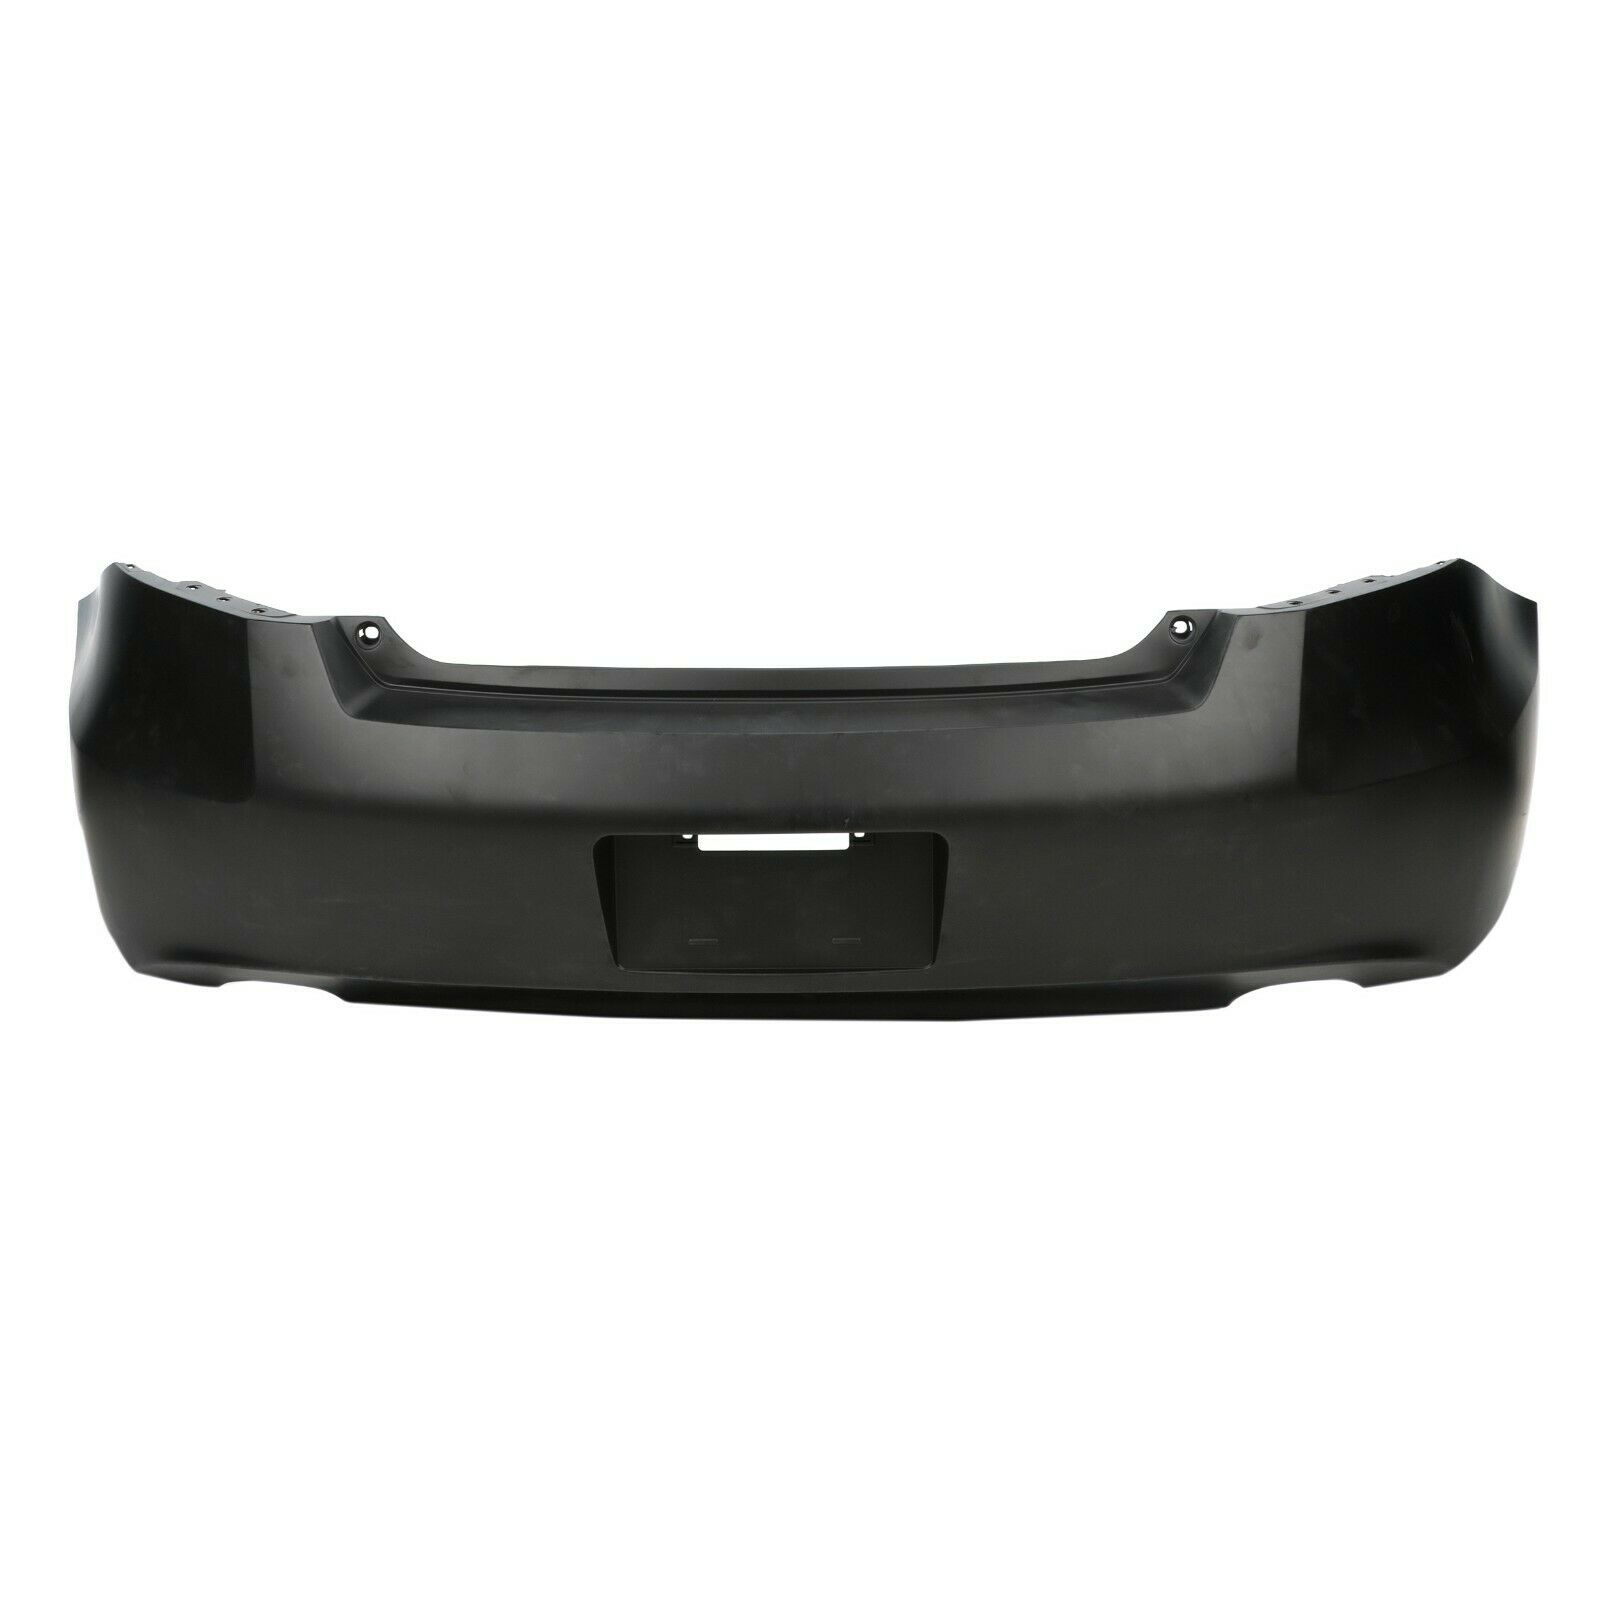 2008-2010 Honda Accord Coupe Rear Bumper Painted to Match